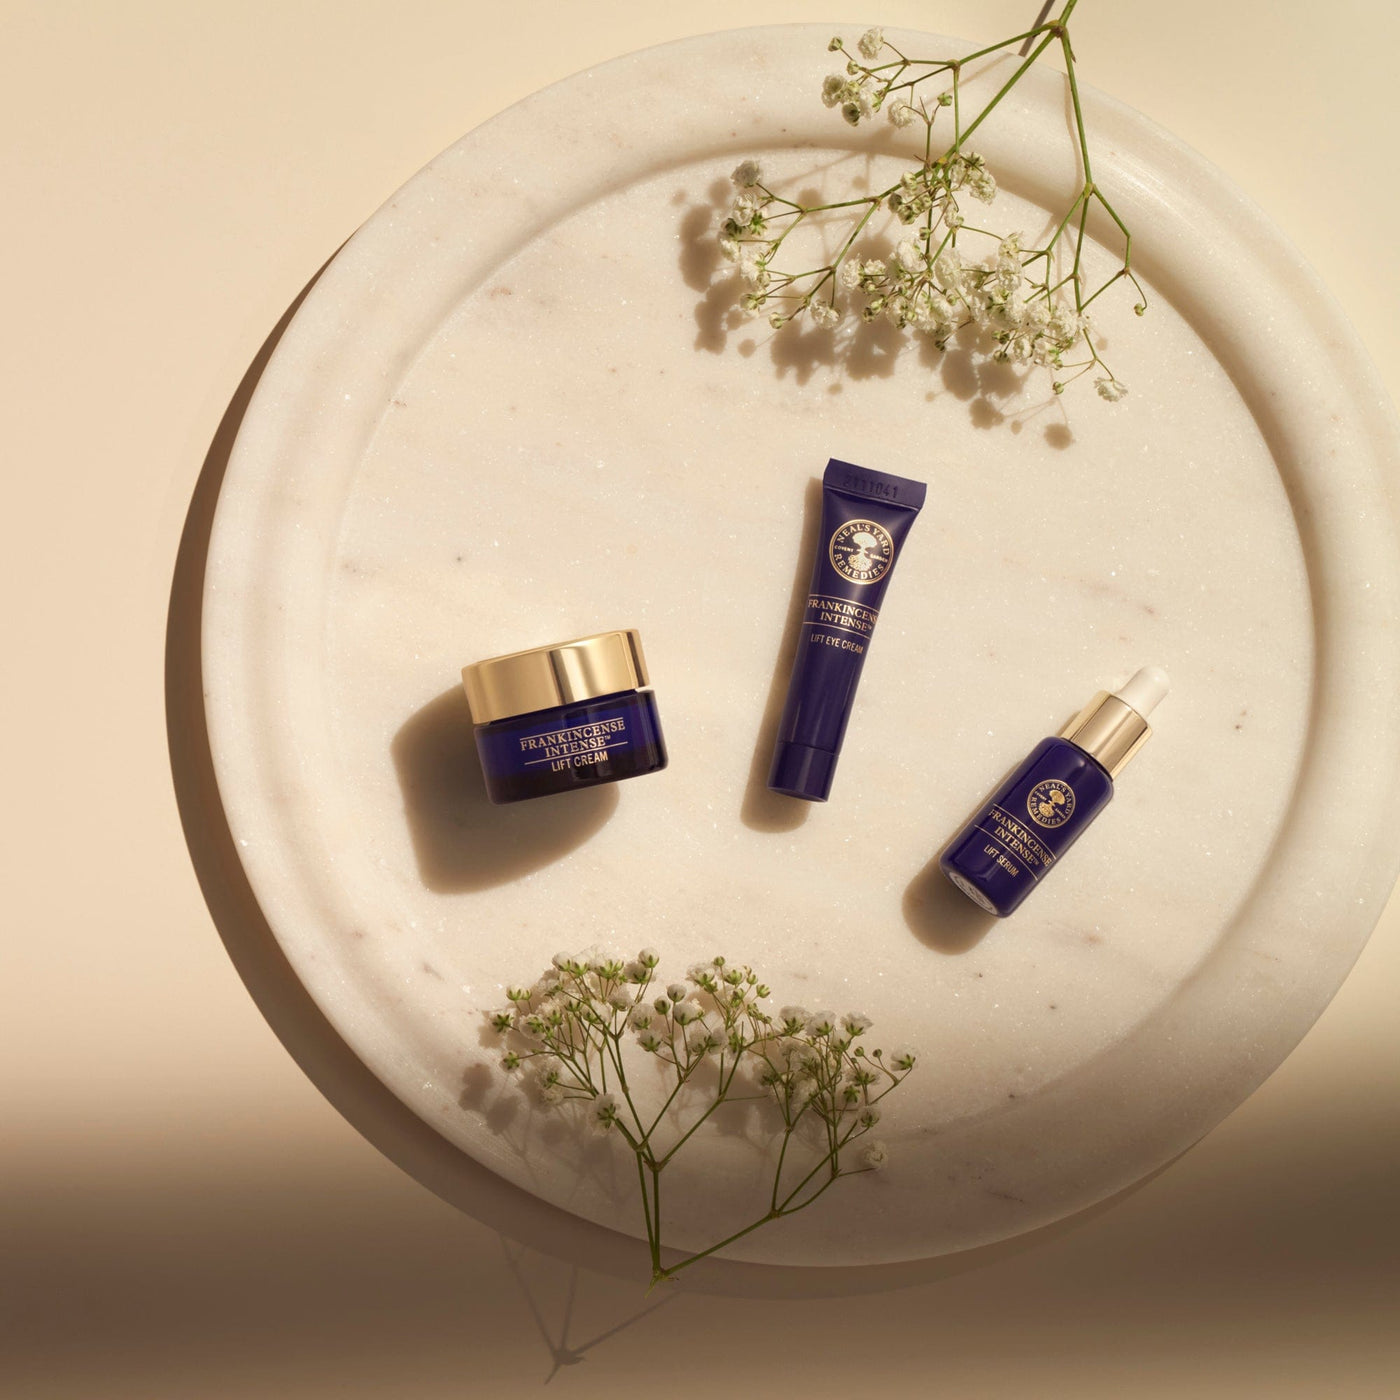 Neal's Yard Remedies Gifts & Collections Frankincense Intense™ Lift Skincare Kit